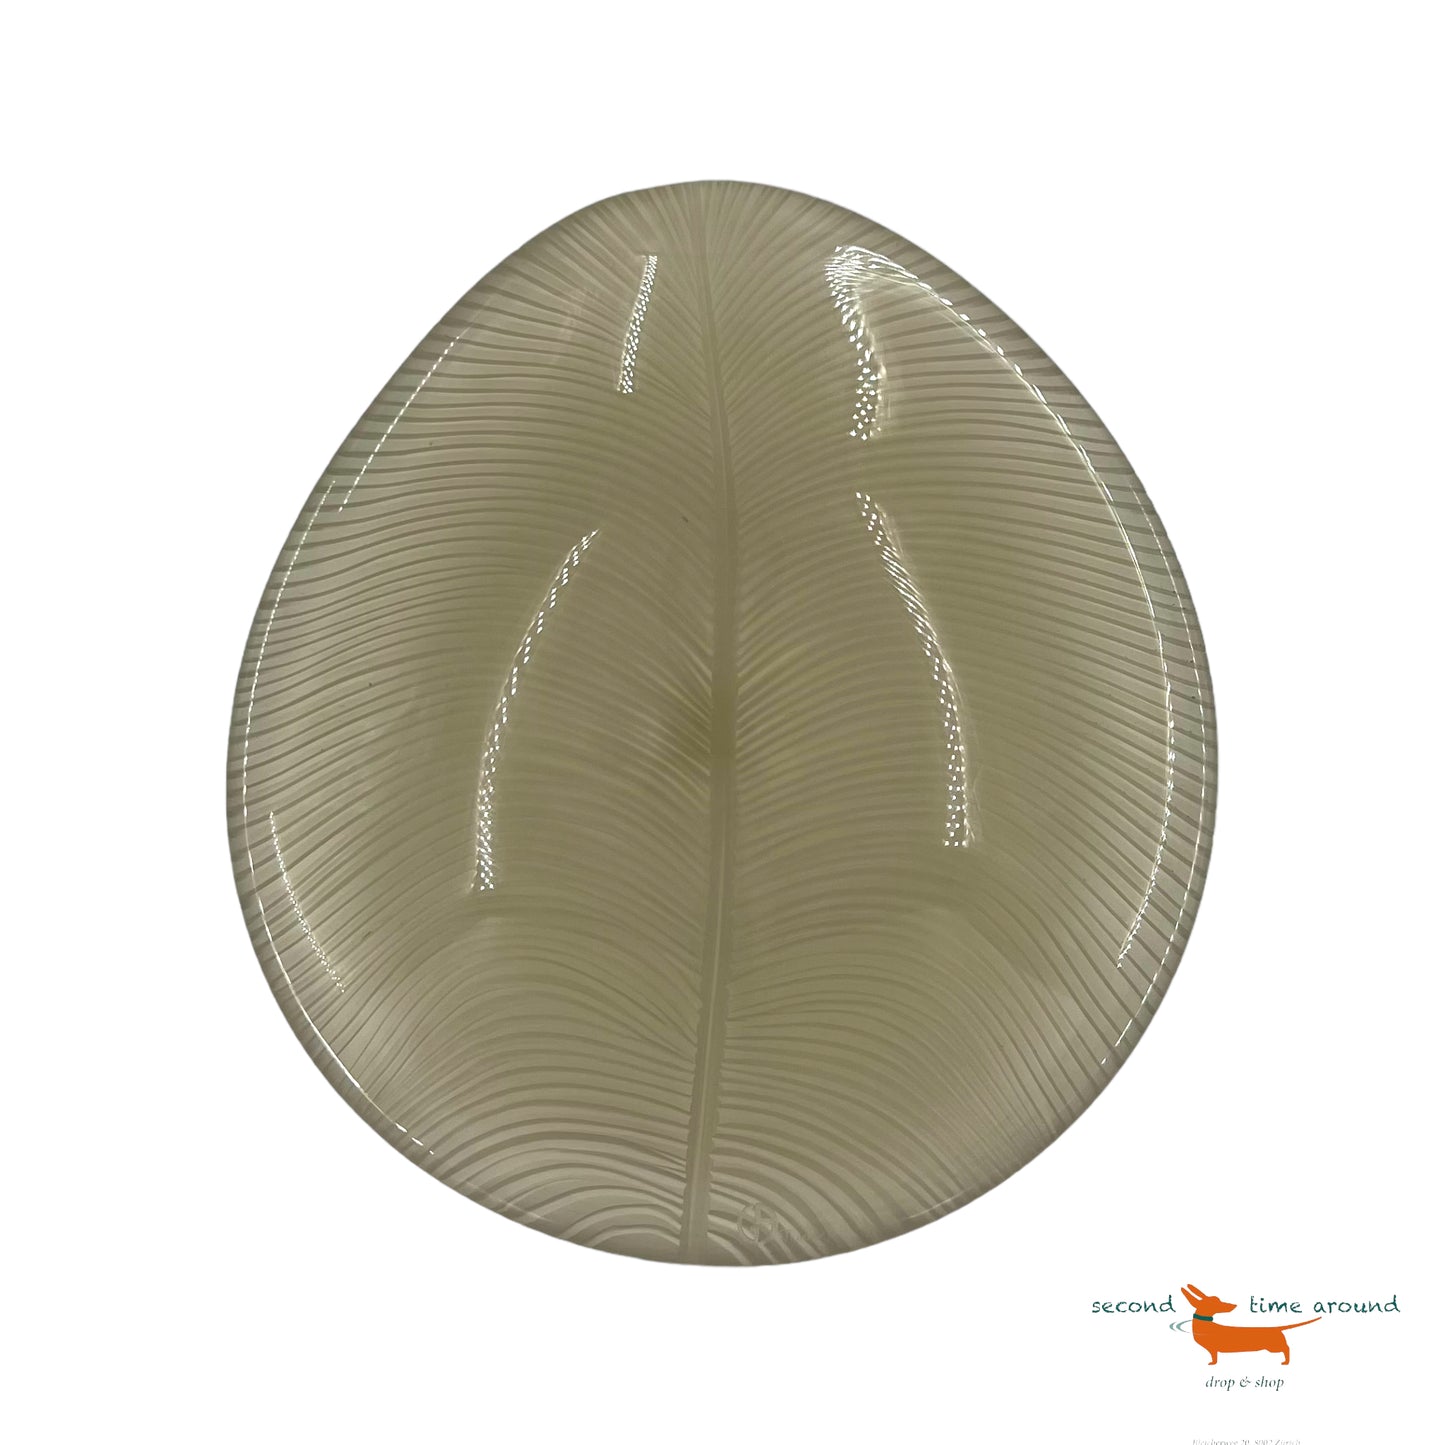 Armani Casa Leaf-shaped centrepiece made of Murano glass, entirely handmade, without using any moulds